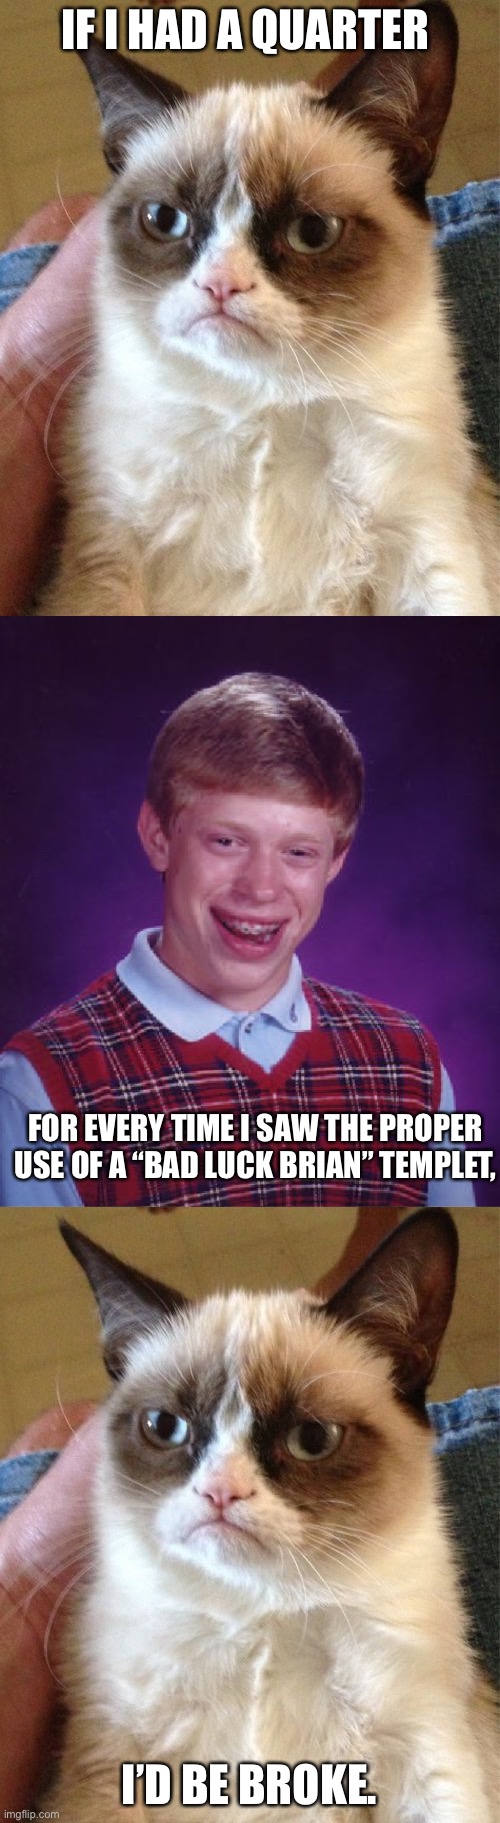 Bad “Bad Luck Brian” | IF I HAD A QUARTER; FOR EVERY TIME I SAW THE PROPER USE OF A “BAD LUCK BRIAN” TEMPLET, I’D BE BROKE. | image tagged in memes,bad luck brian,grumpy cat | made w/ Imgflip meme maker